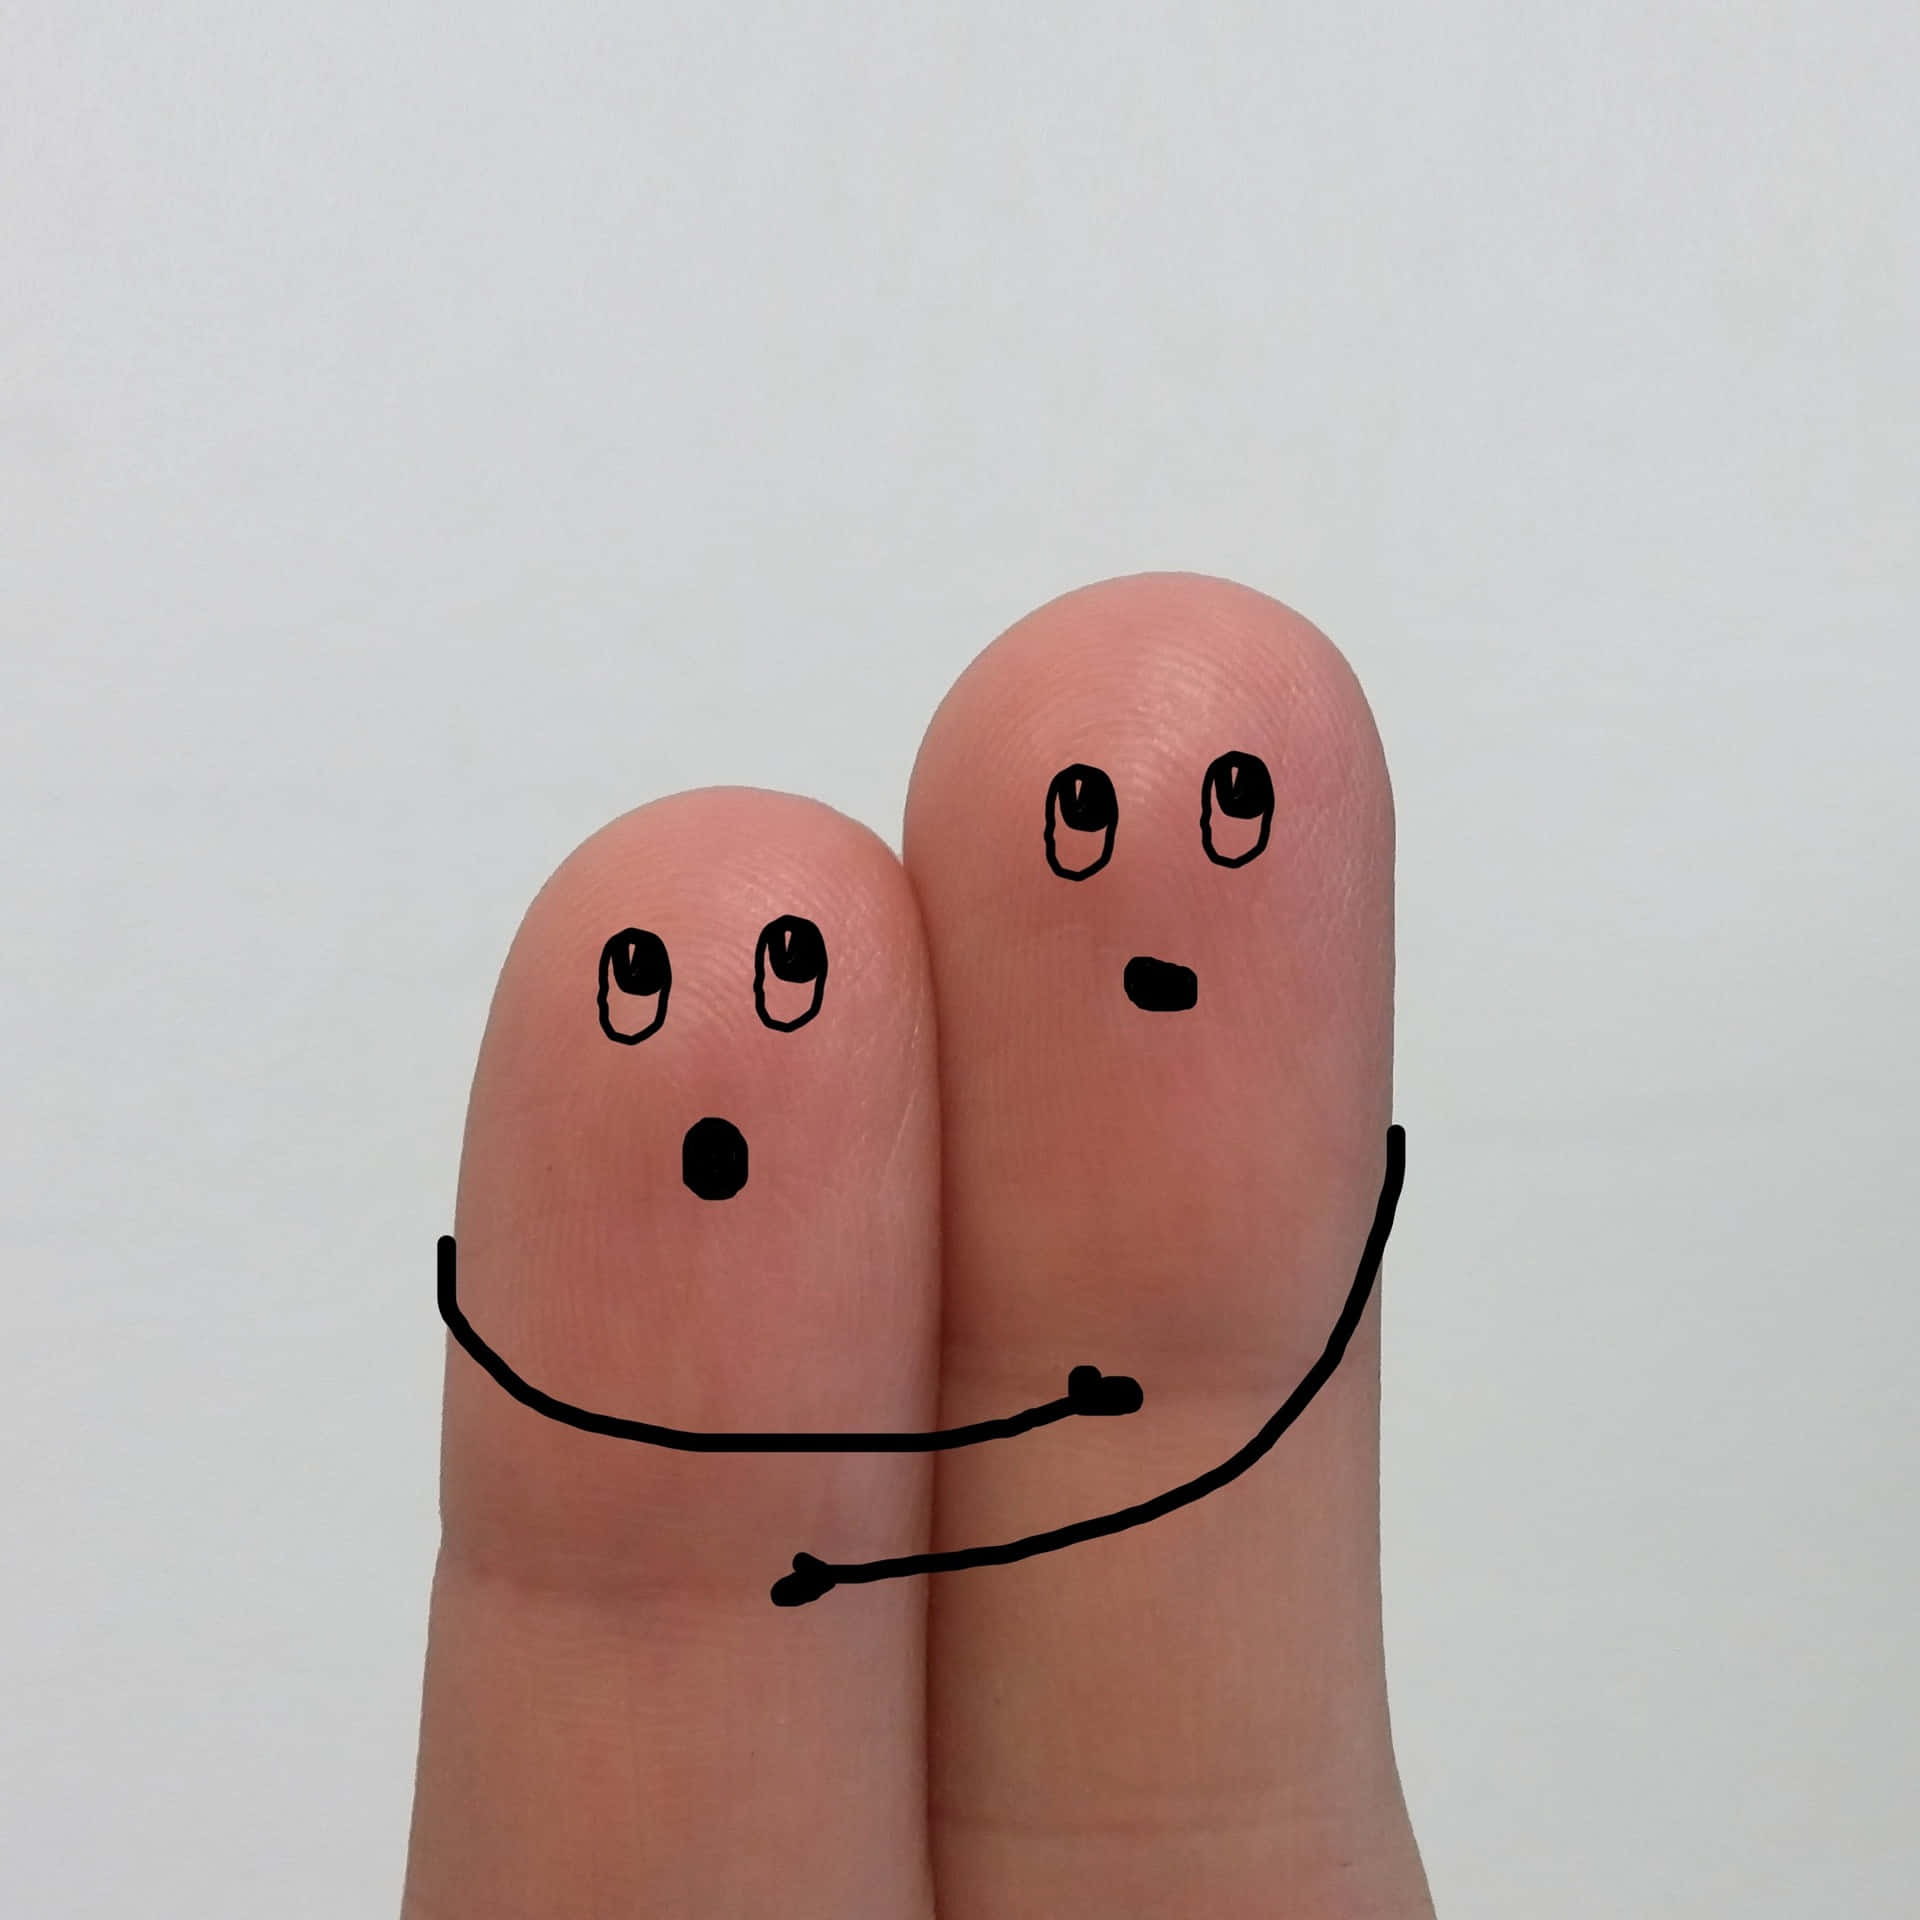 Funny Photo Of Two Tangible Fingers With Faces And Arms Drawn Wallpaper